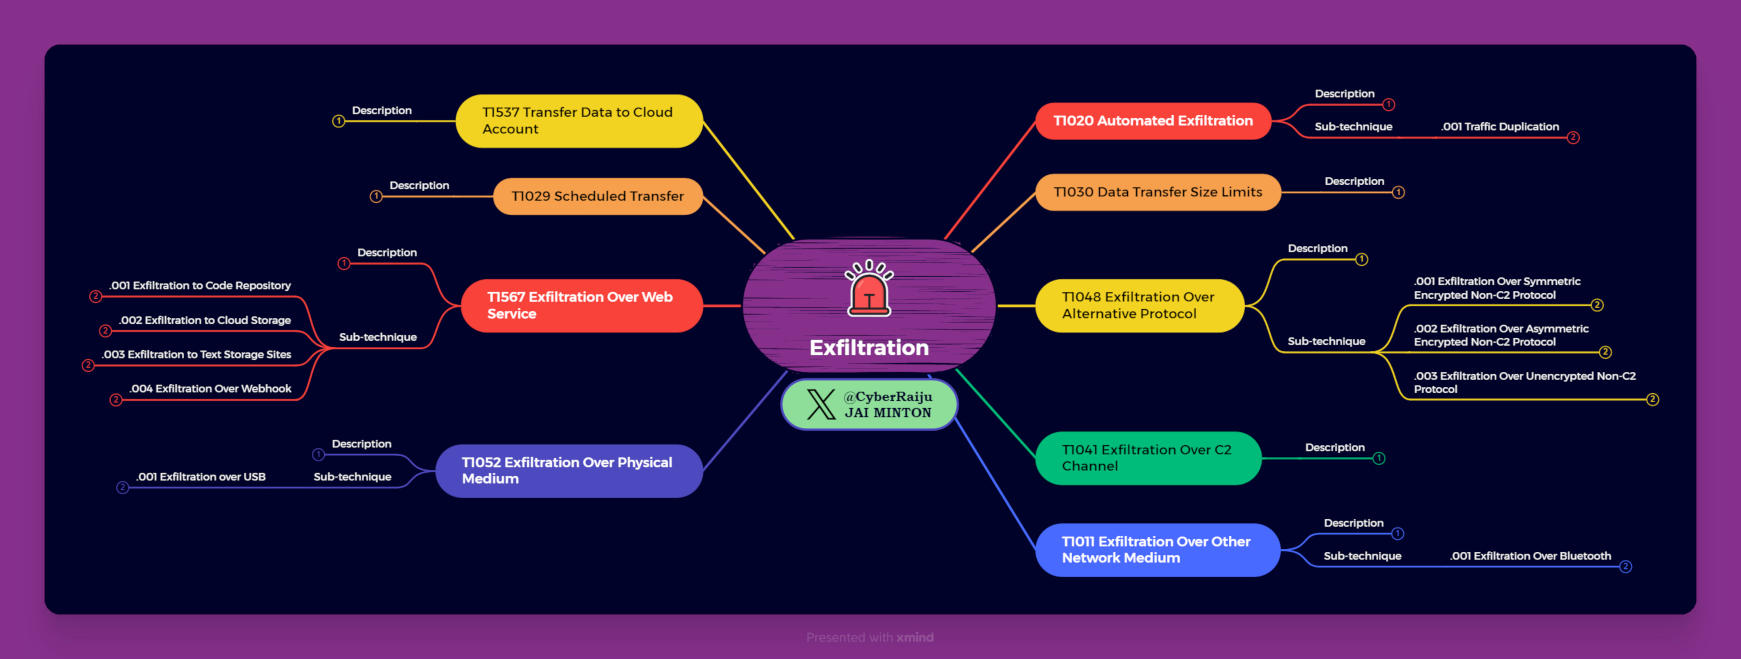 Exfiltration Overview Mind Map